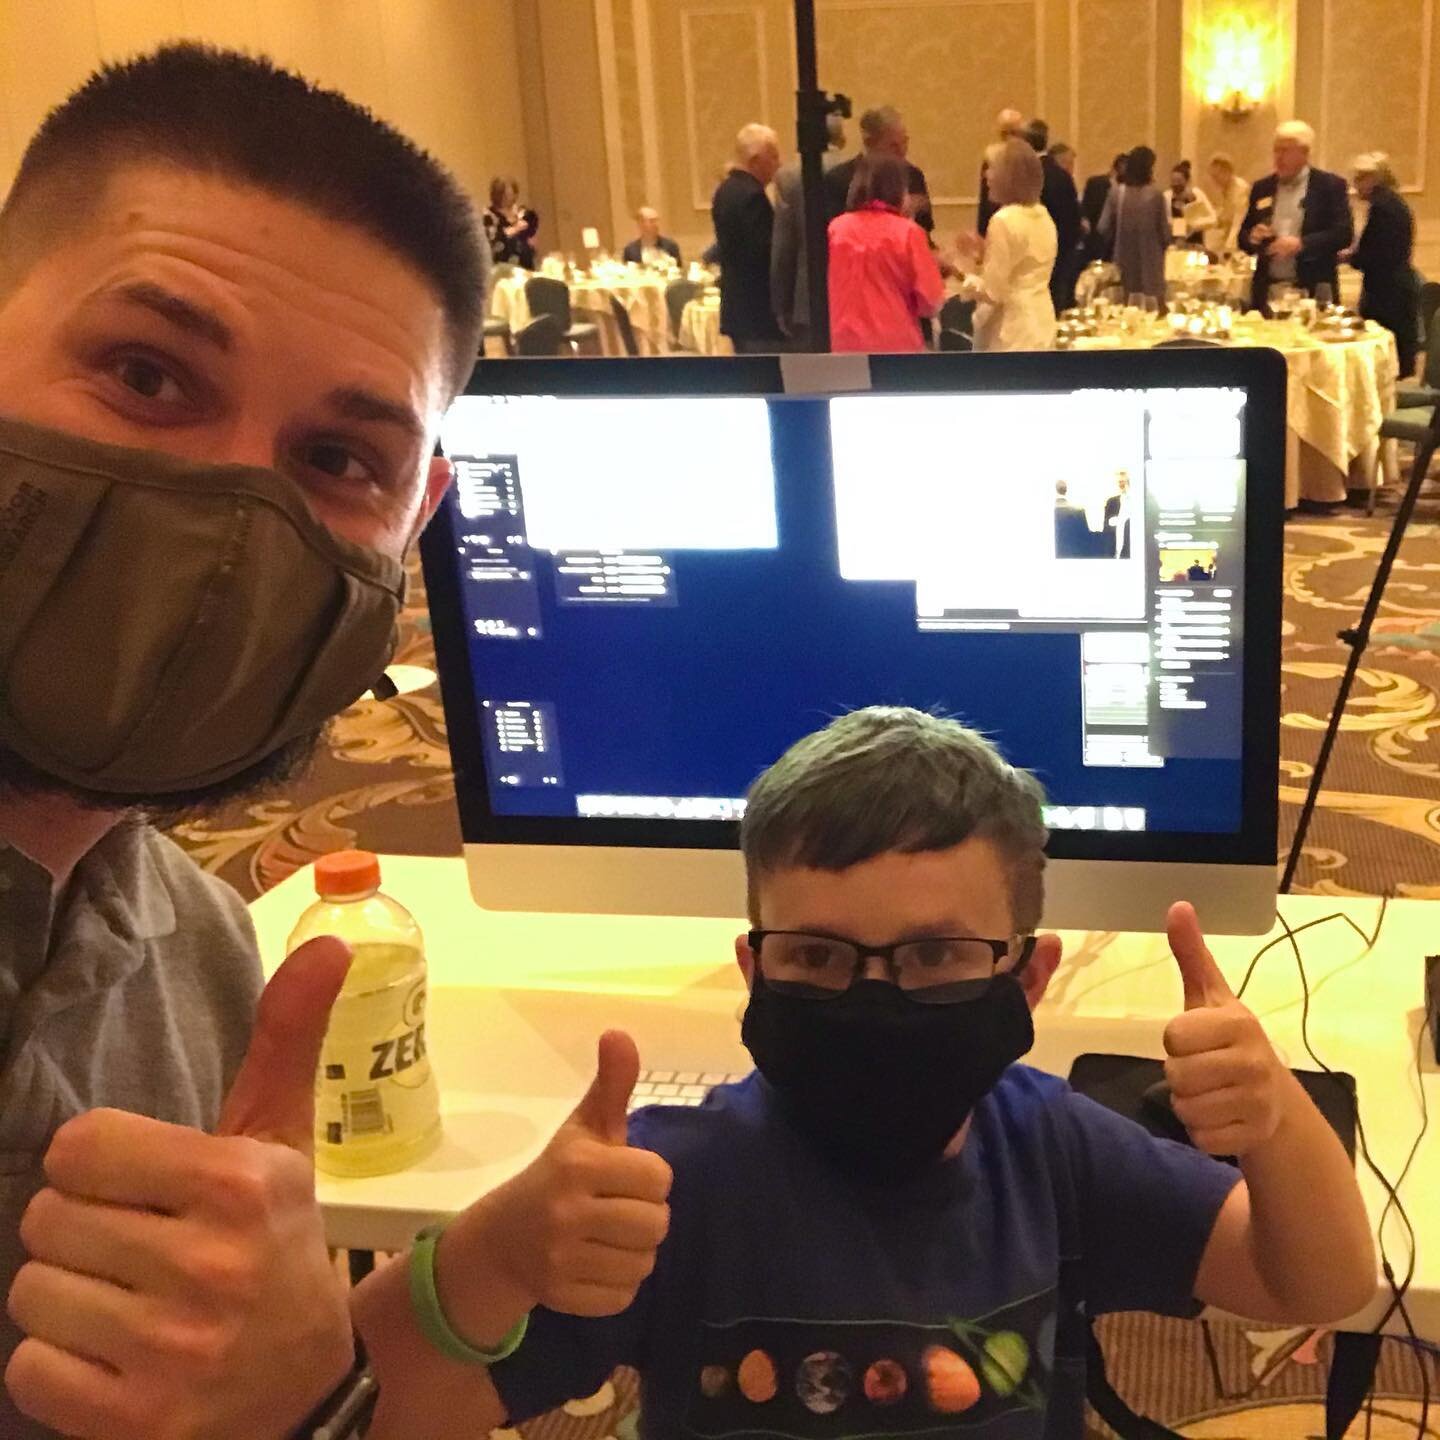 Take your kid to work day! Very happy to have my 8 year old assisting me, already learning how to produce a multi-cam livestream event! #livestream #waldorfhotel #familyownedandoperated